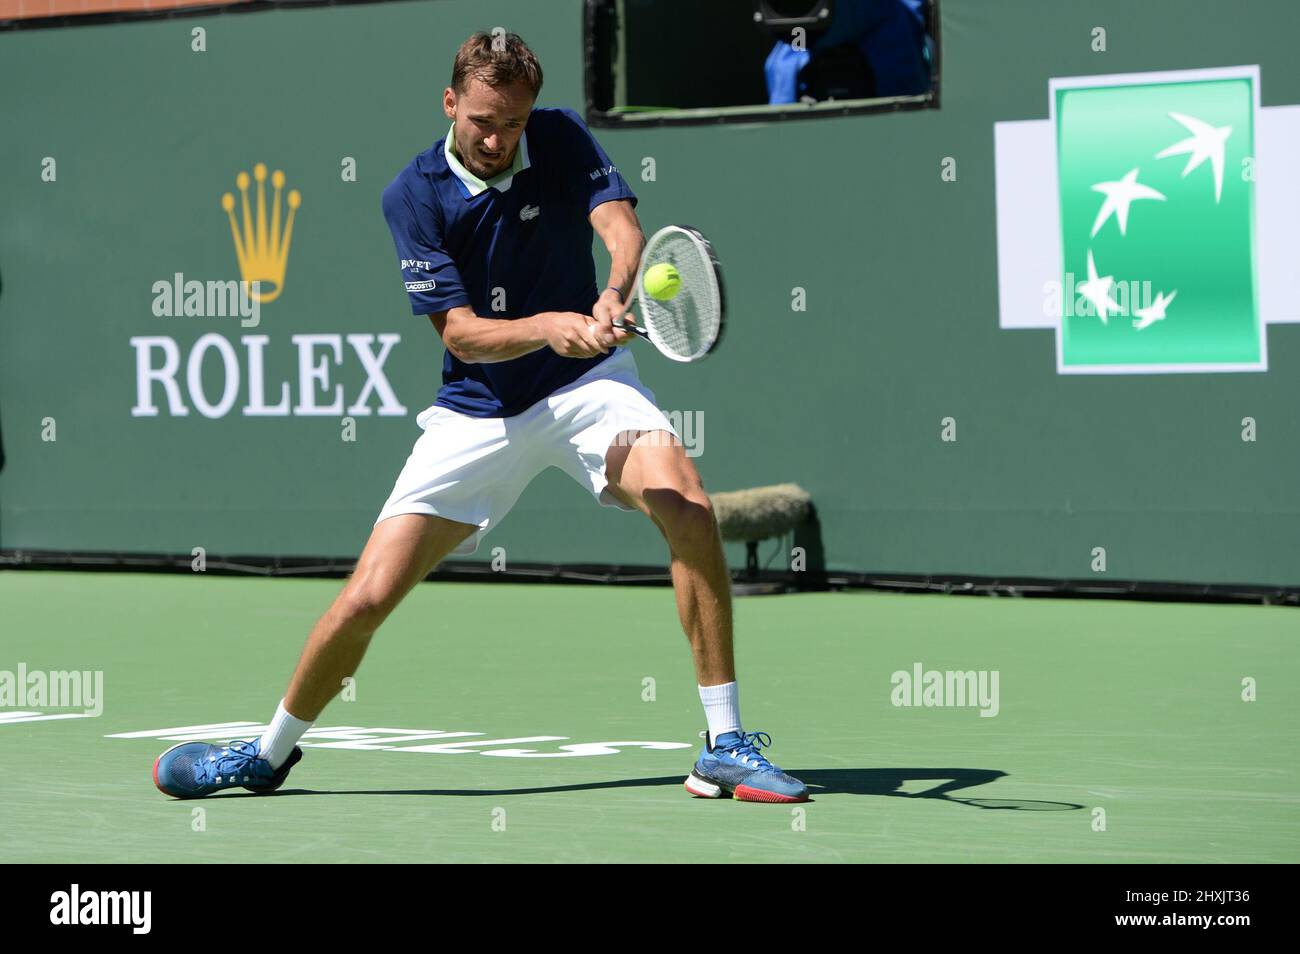 Daniil Medvedev (RUS) defeated Tomas Machac (CZE) 6-3, 6-2, at the BNP Paribas Open being played at Indian Wells Tennis Garden in Indian Wells, California on March 12, 2022: © Karla Kinne/Tennisclix/CSM Stock Photo